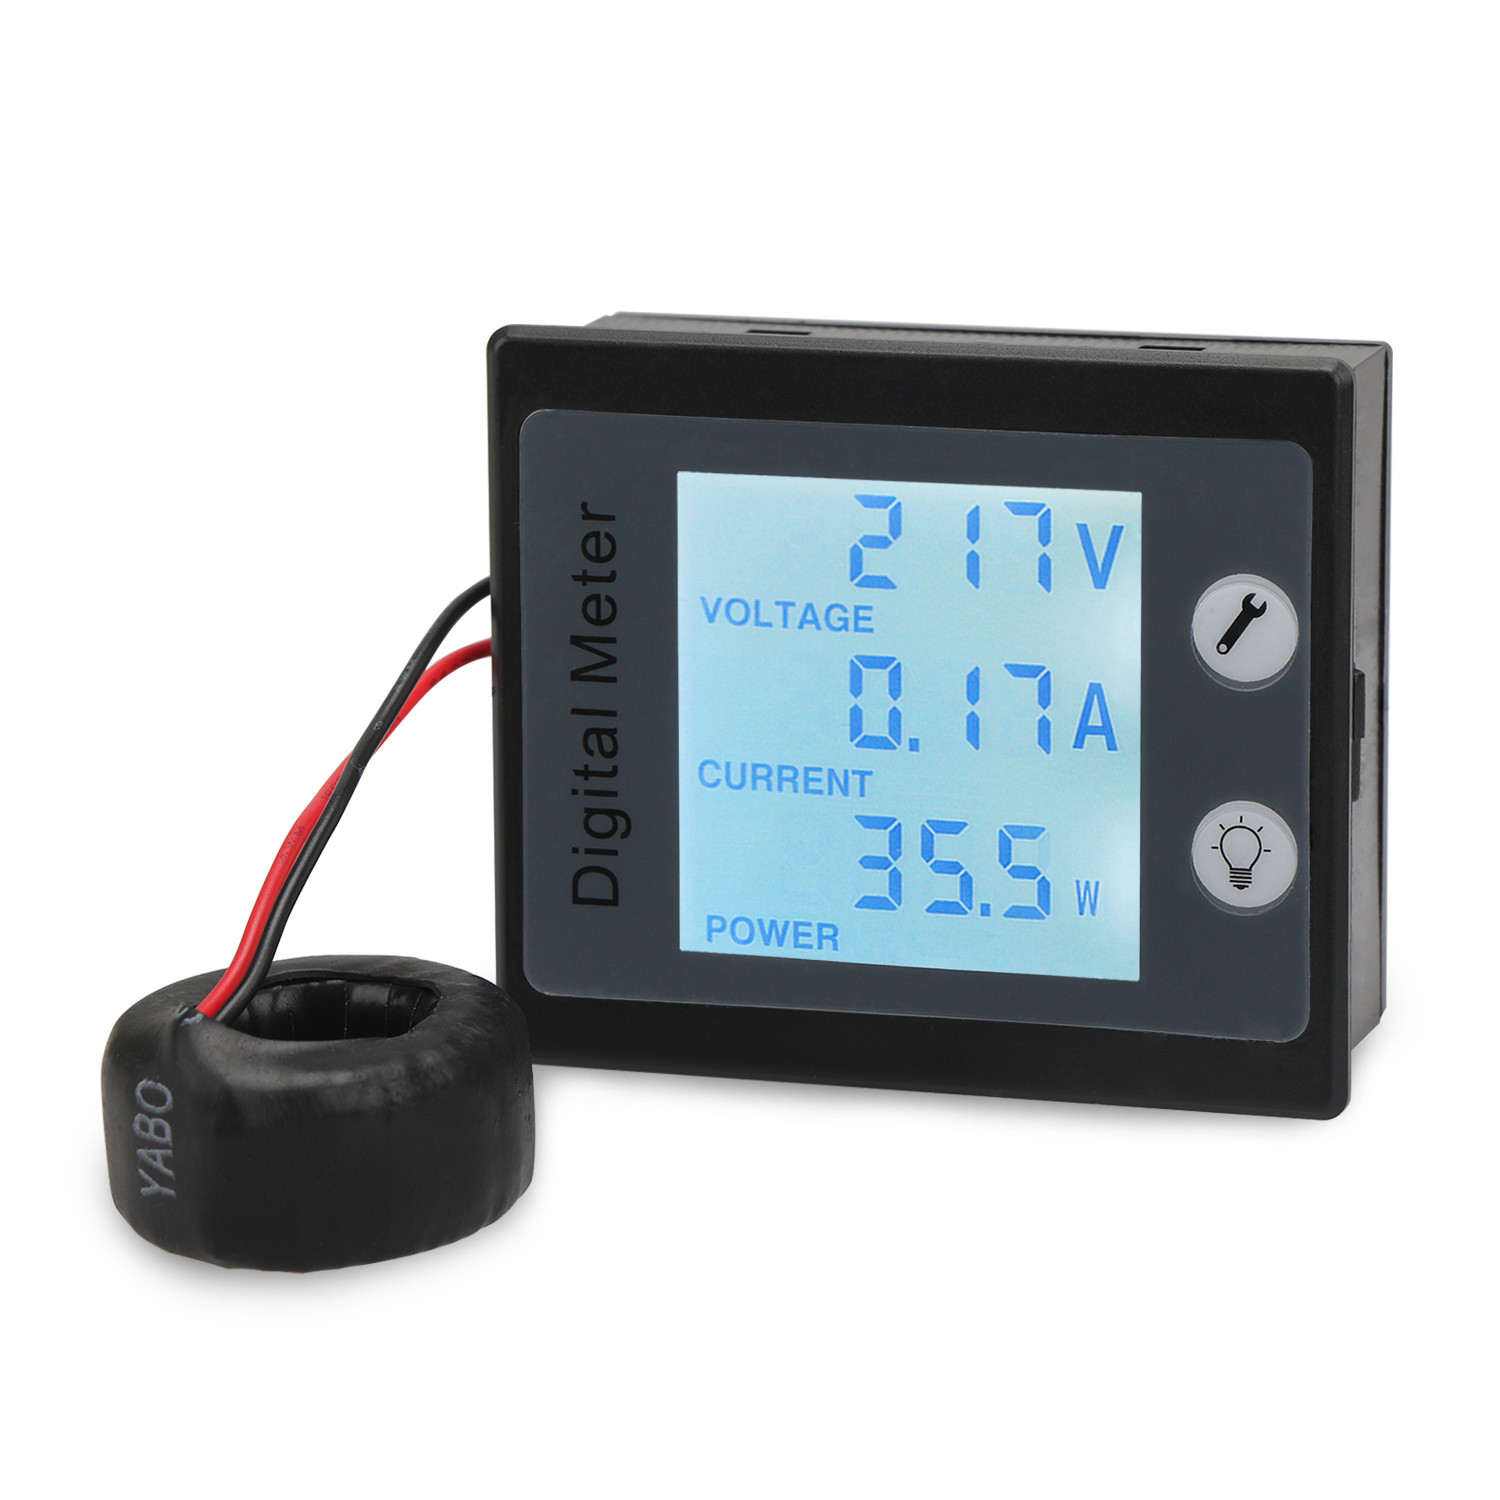 AC Multifunction Digital Meter Volt Current Power Energy Test Monitor with CT 